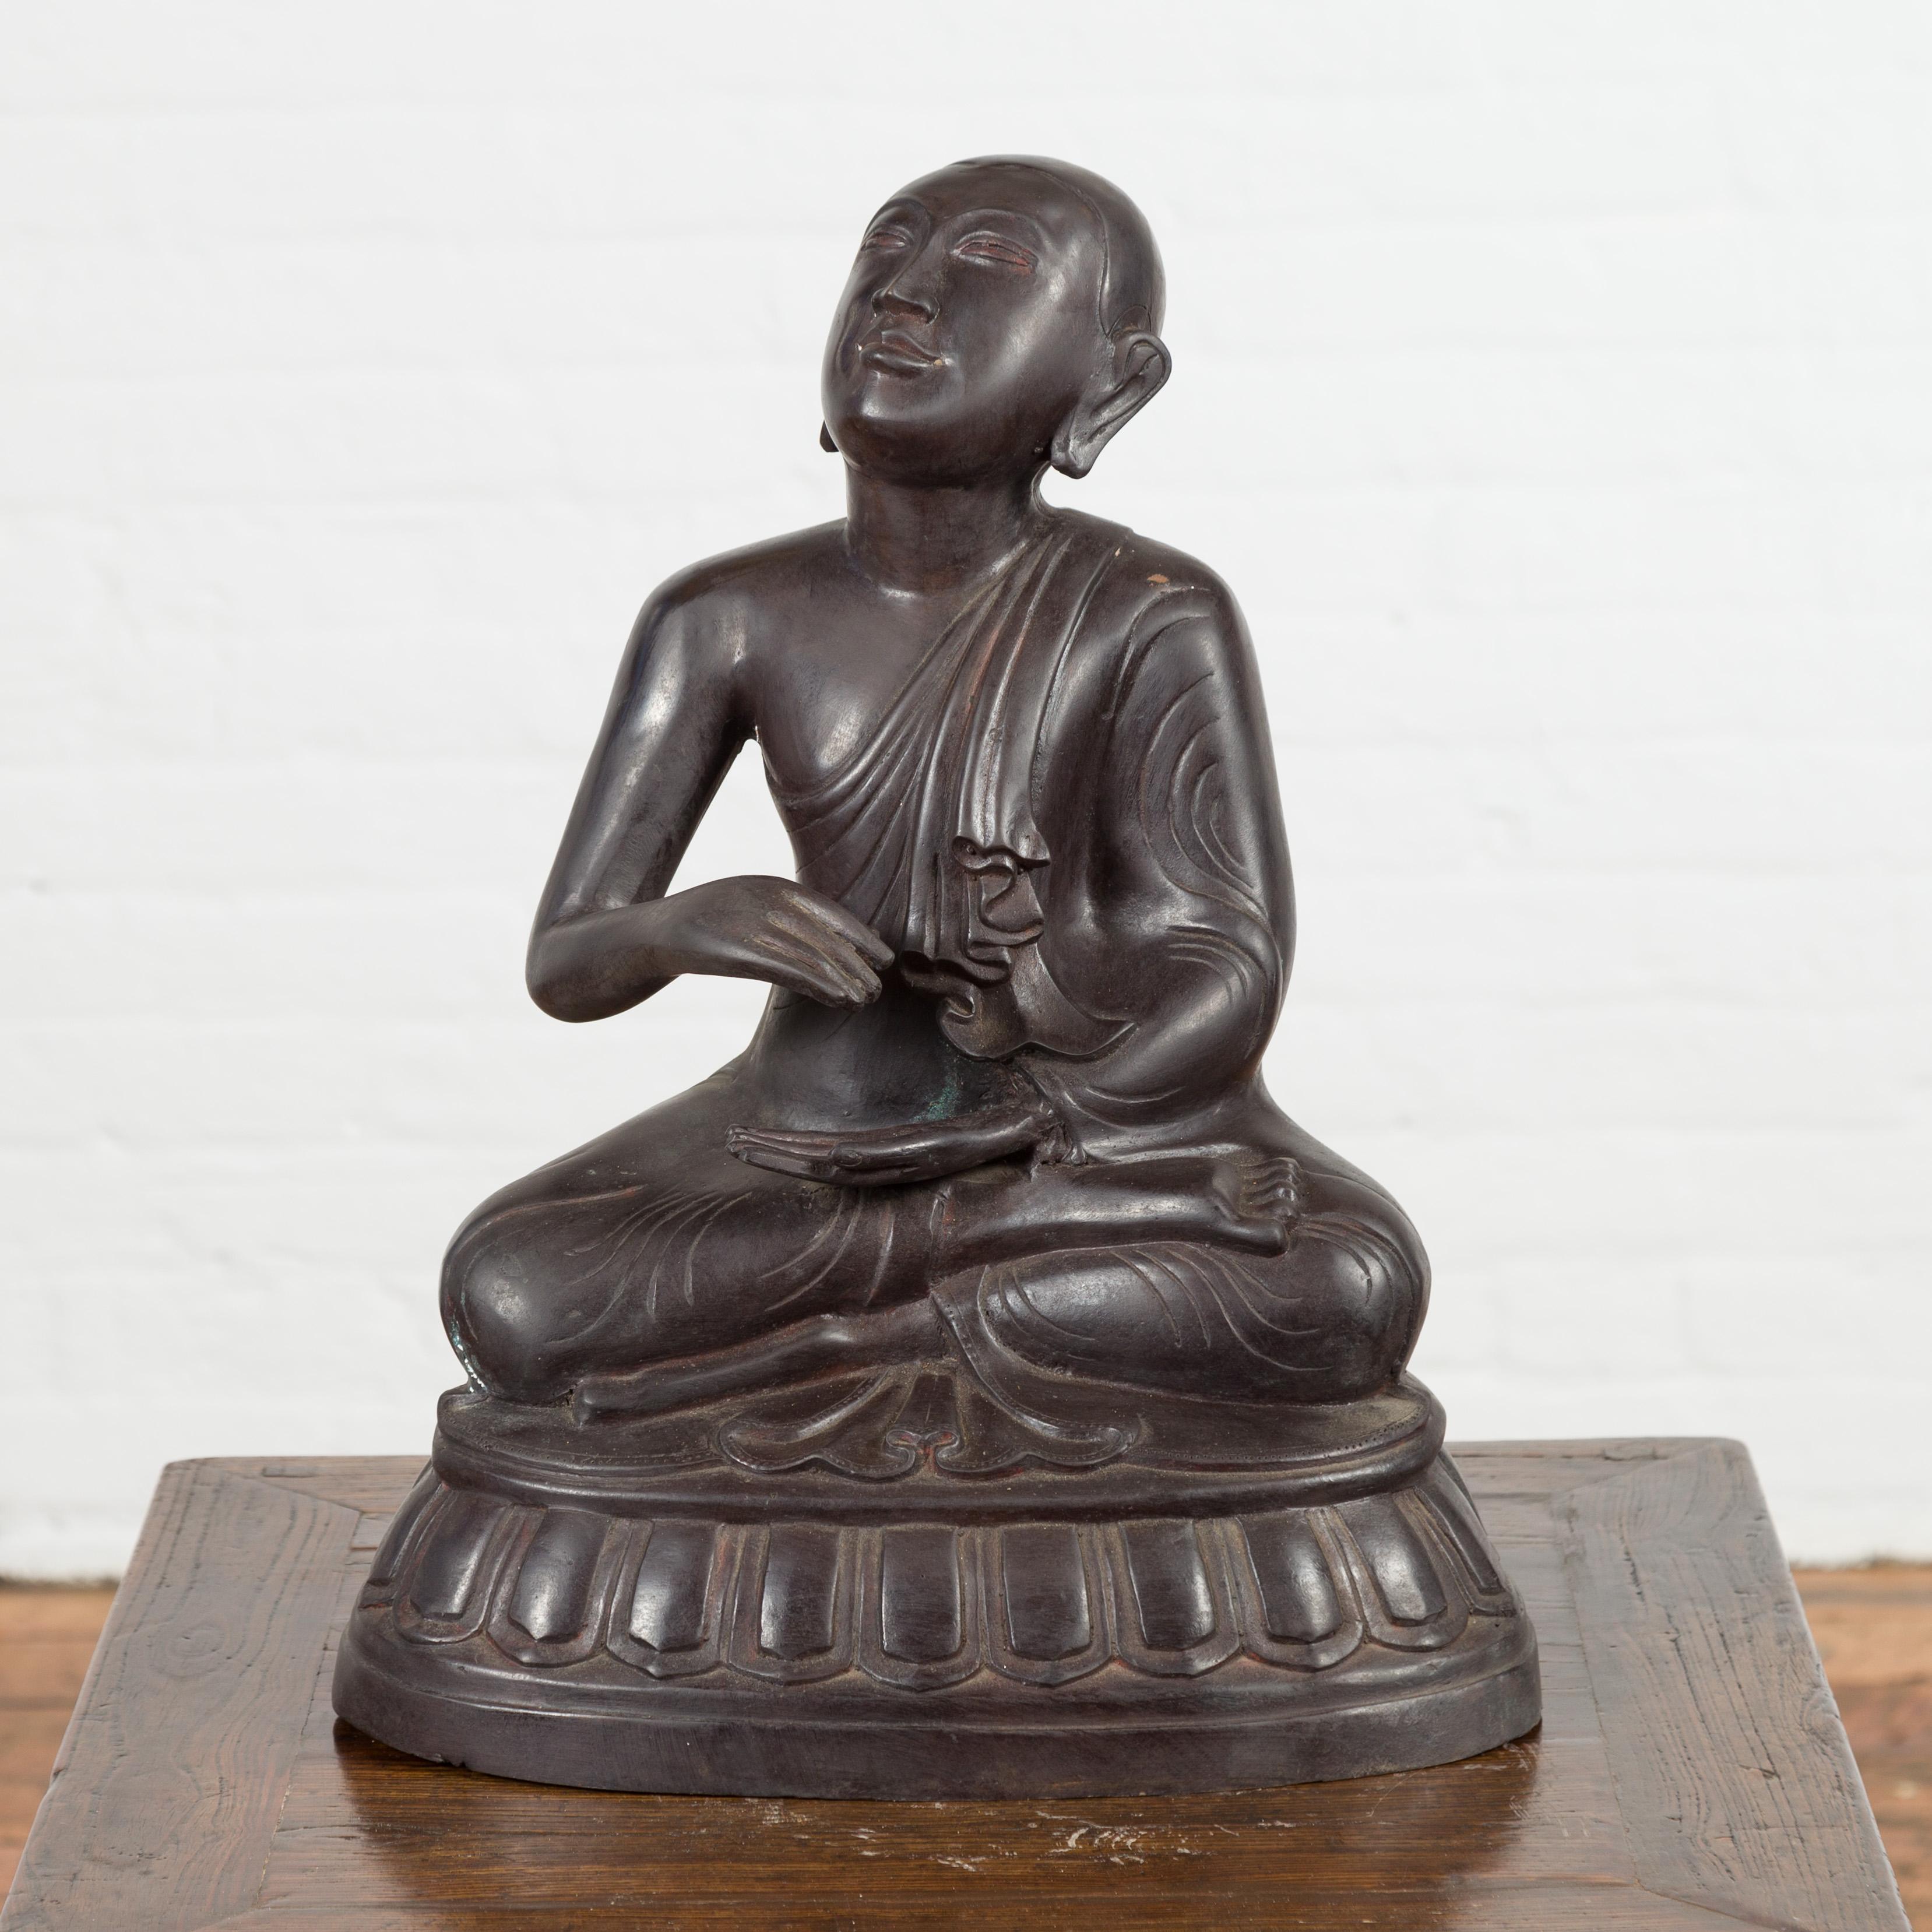 A vintage bronze sculpture depicting a praying monk sitting on a base. Created with the traditional technique of the lost-wax (à la cire perdue) that allows a great precision and finesse in the details, this vintage statue depicts a praying monk